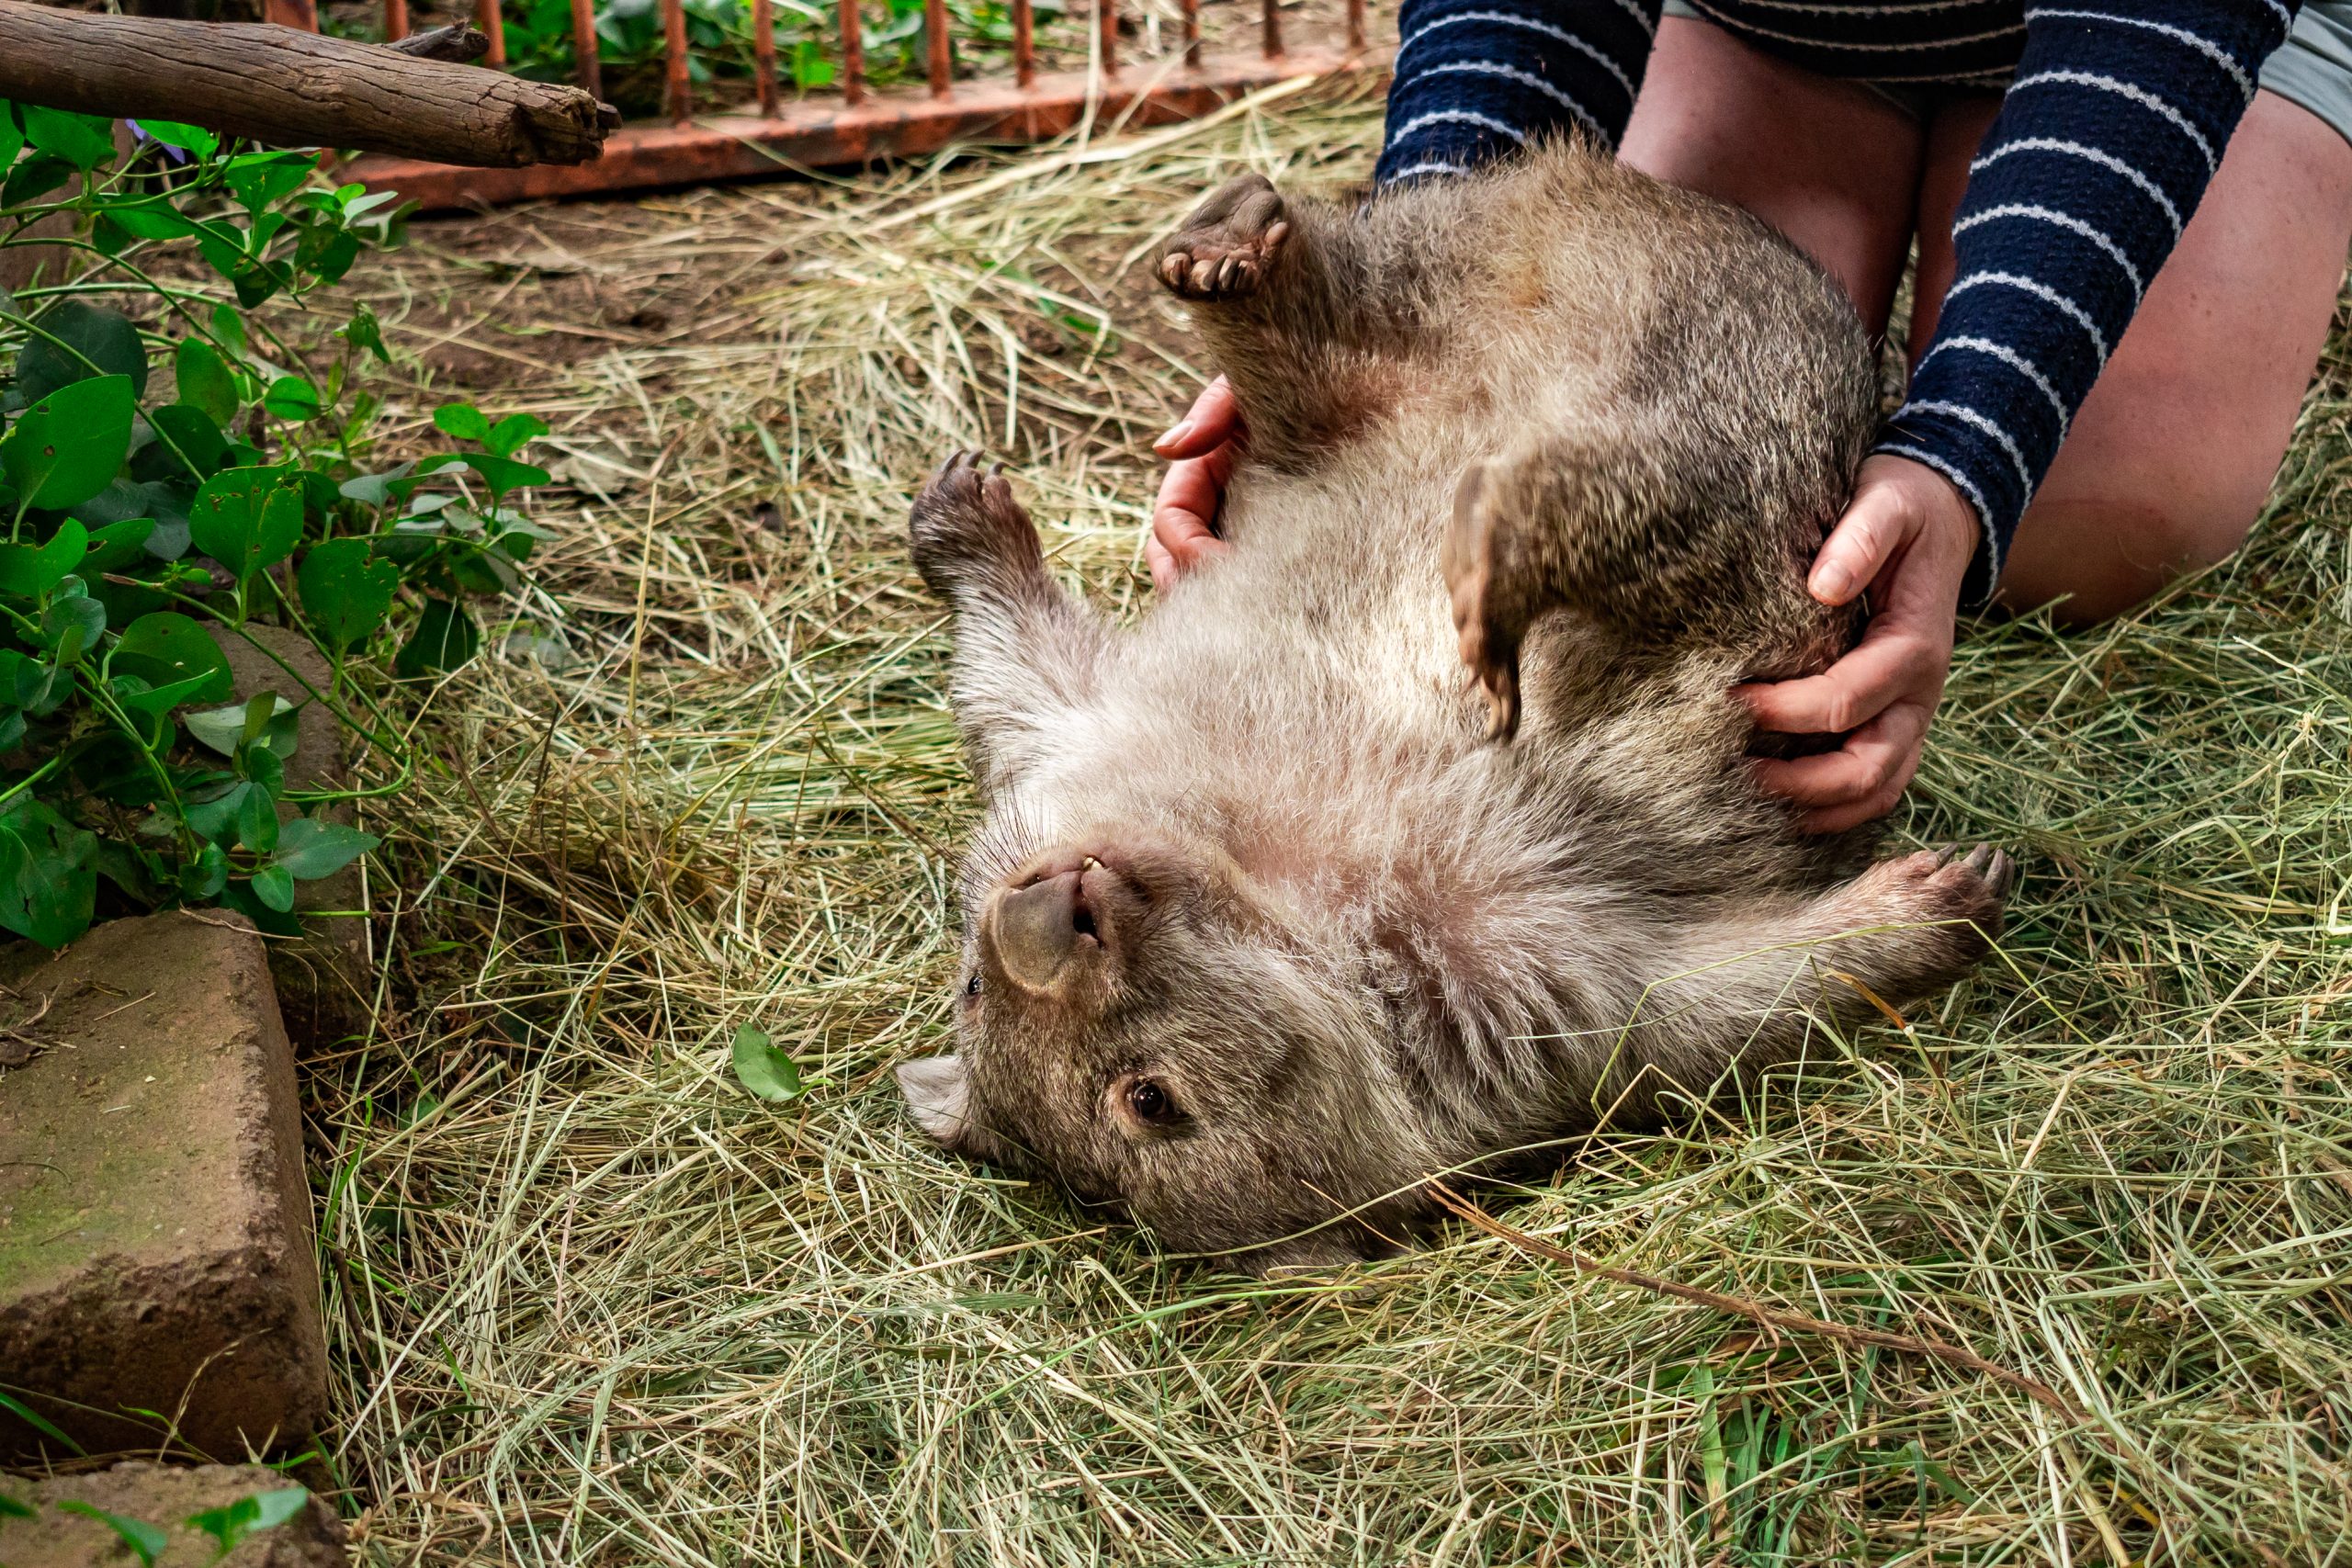 Wombat having its stomach scratched